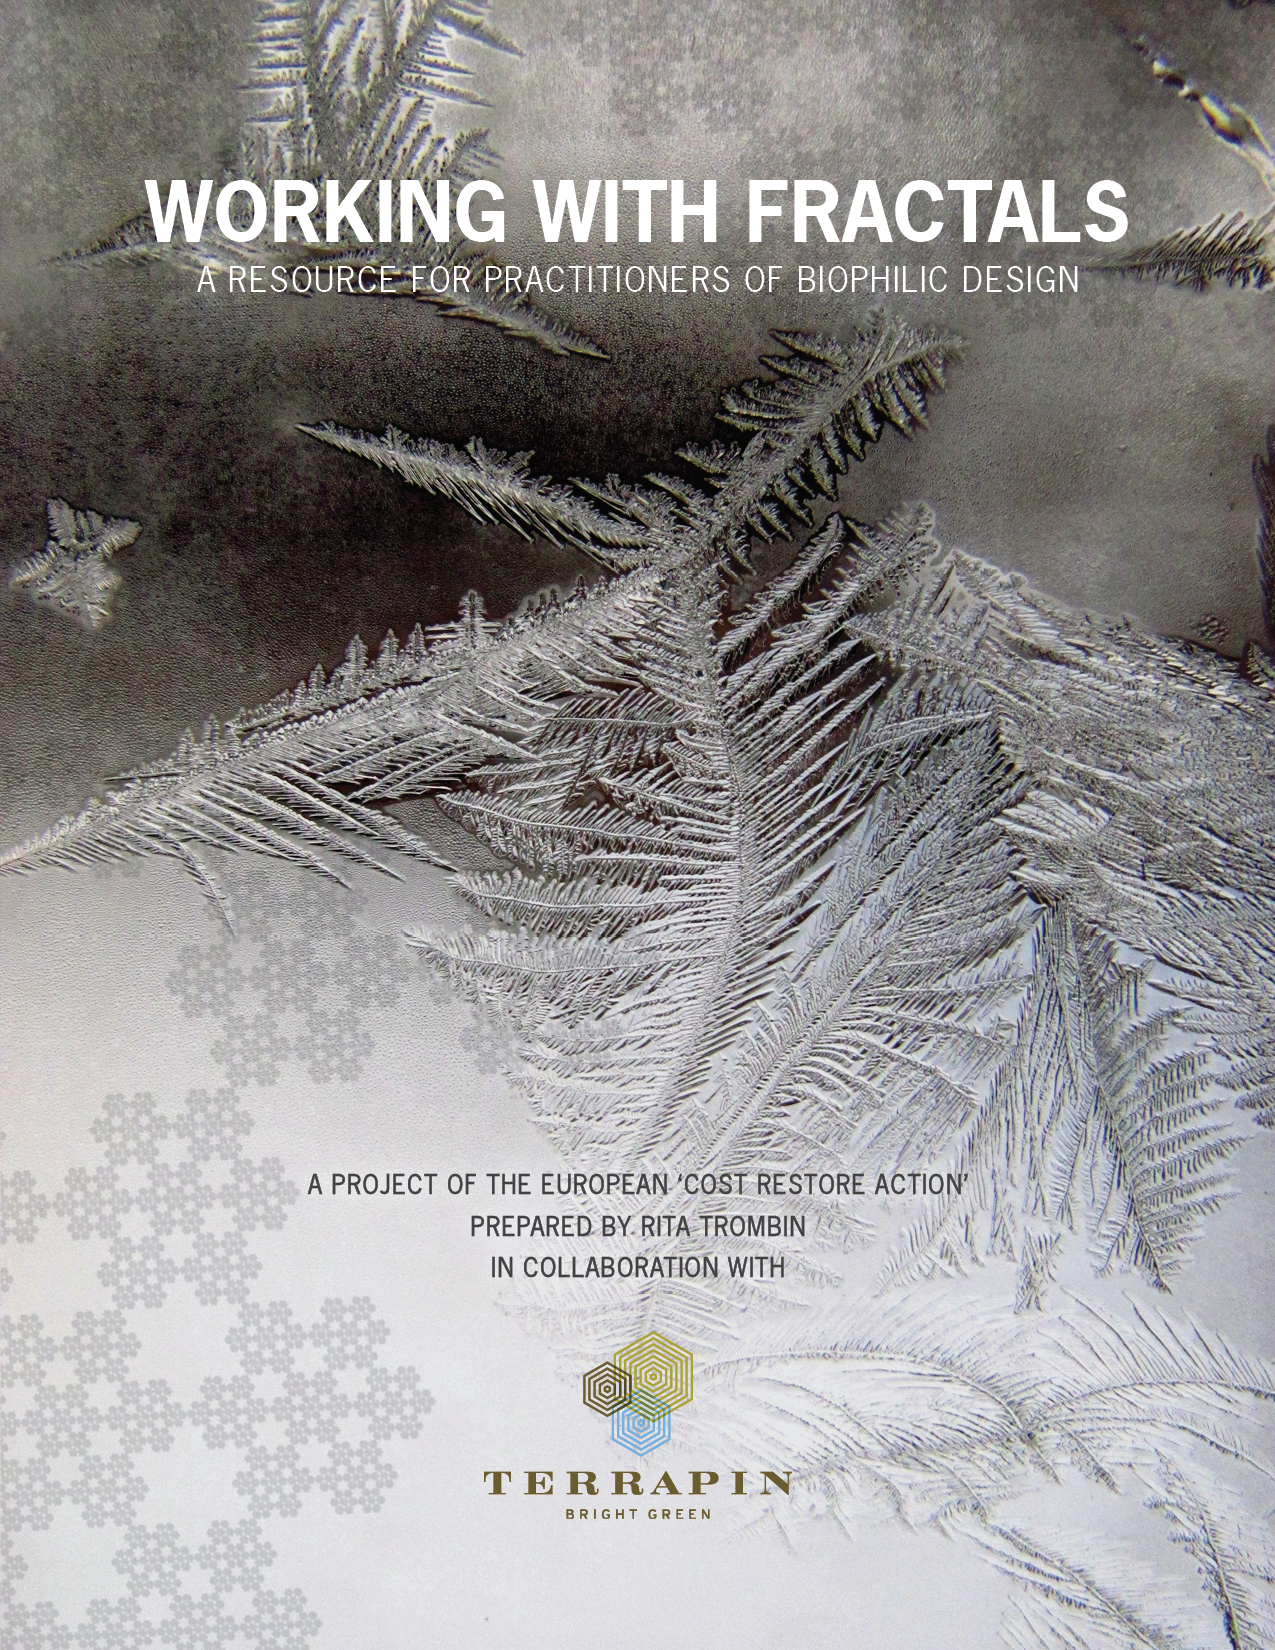 Working with Fractals - Terrapin Bright Green